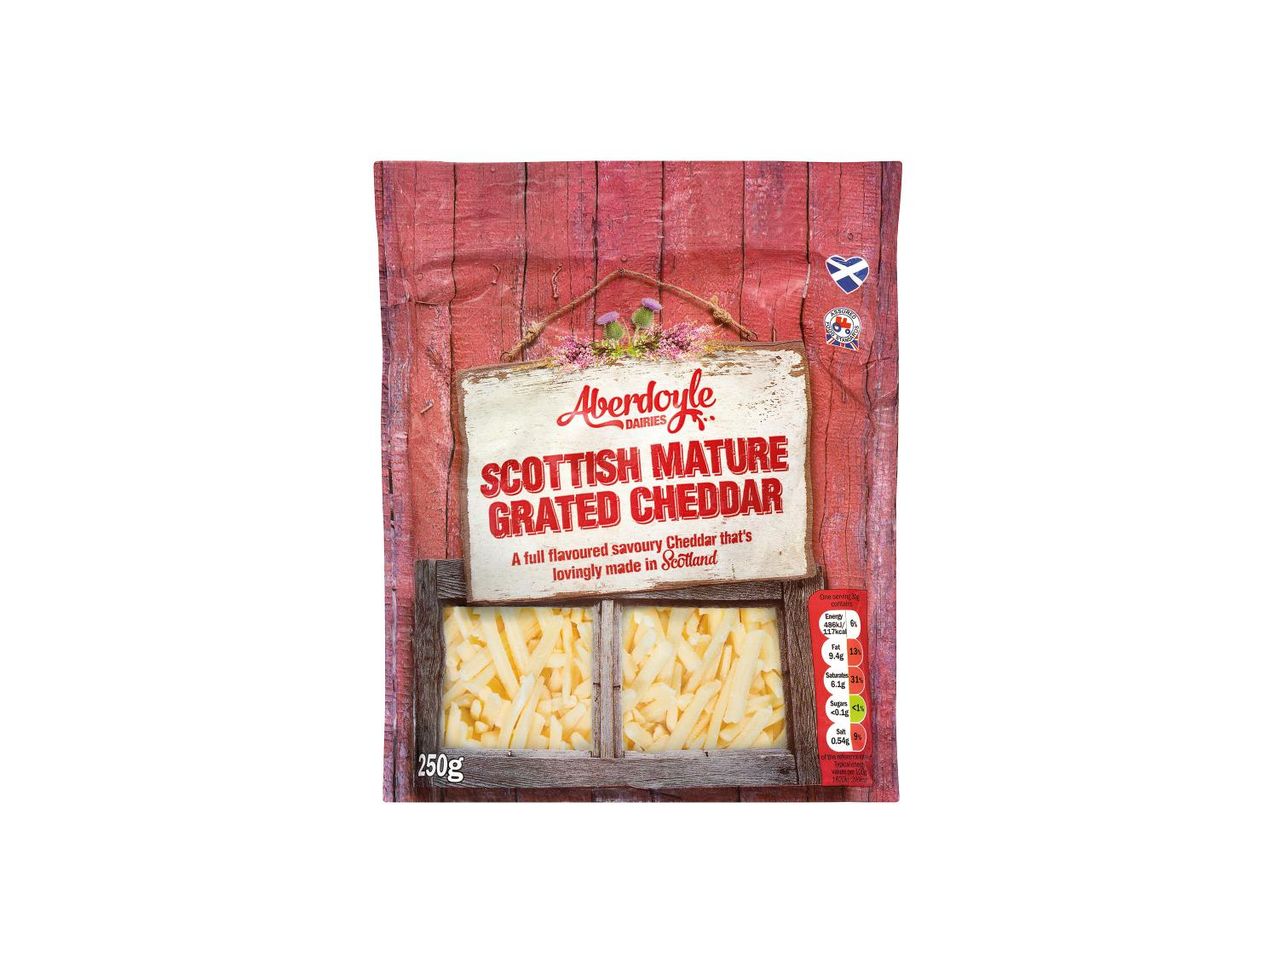 Go to full screen view: Aberdoyle Dairies Scottish Mature Grated Cheddar - Image 1